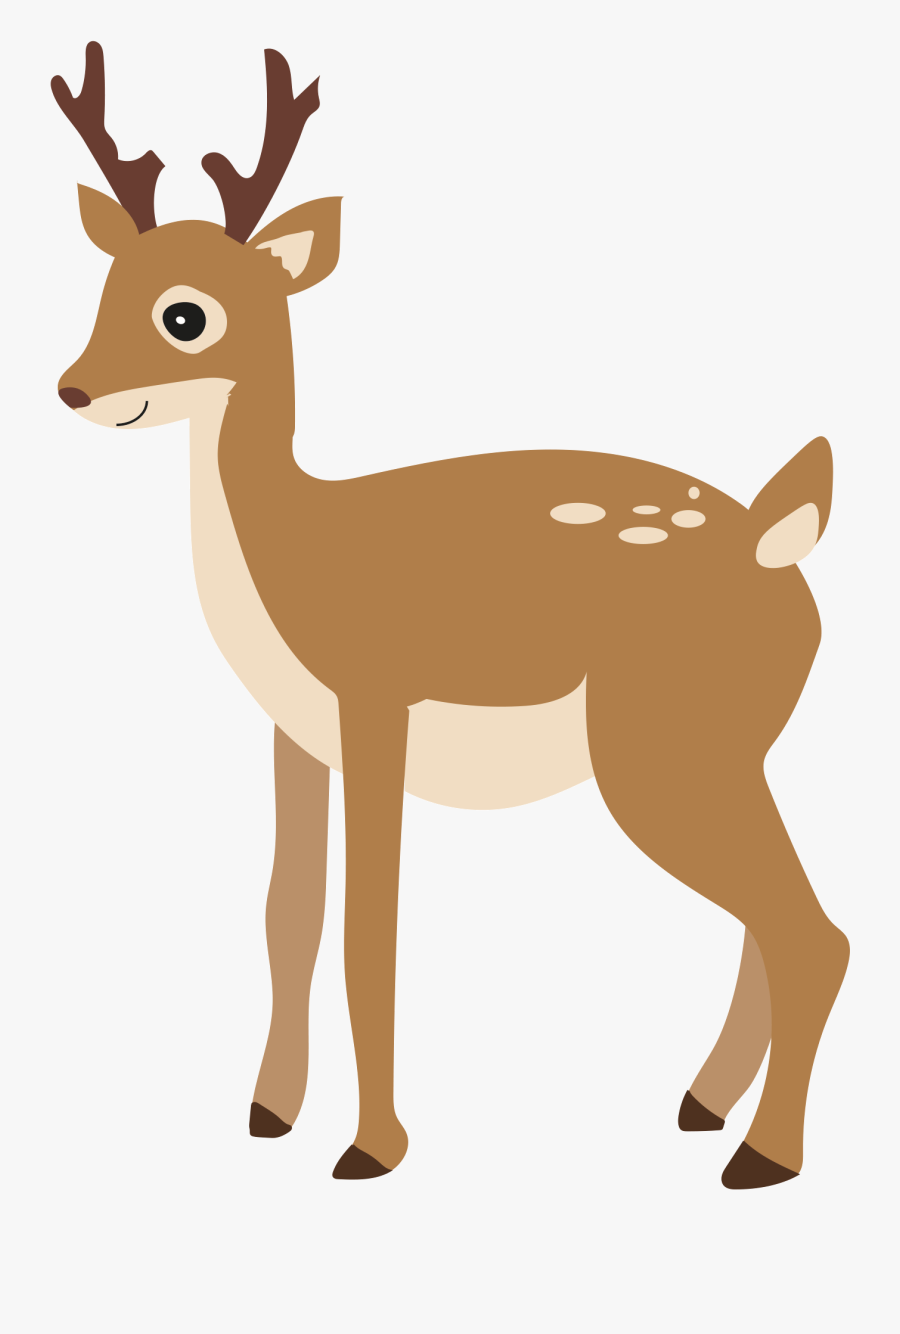 Holly Told Her Friend Dom All About The Leaf And He - Reindeer, Transparent Clipart